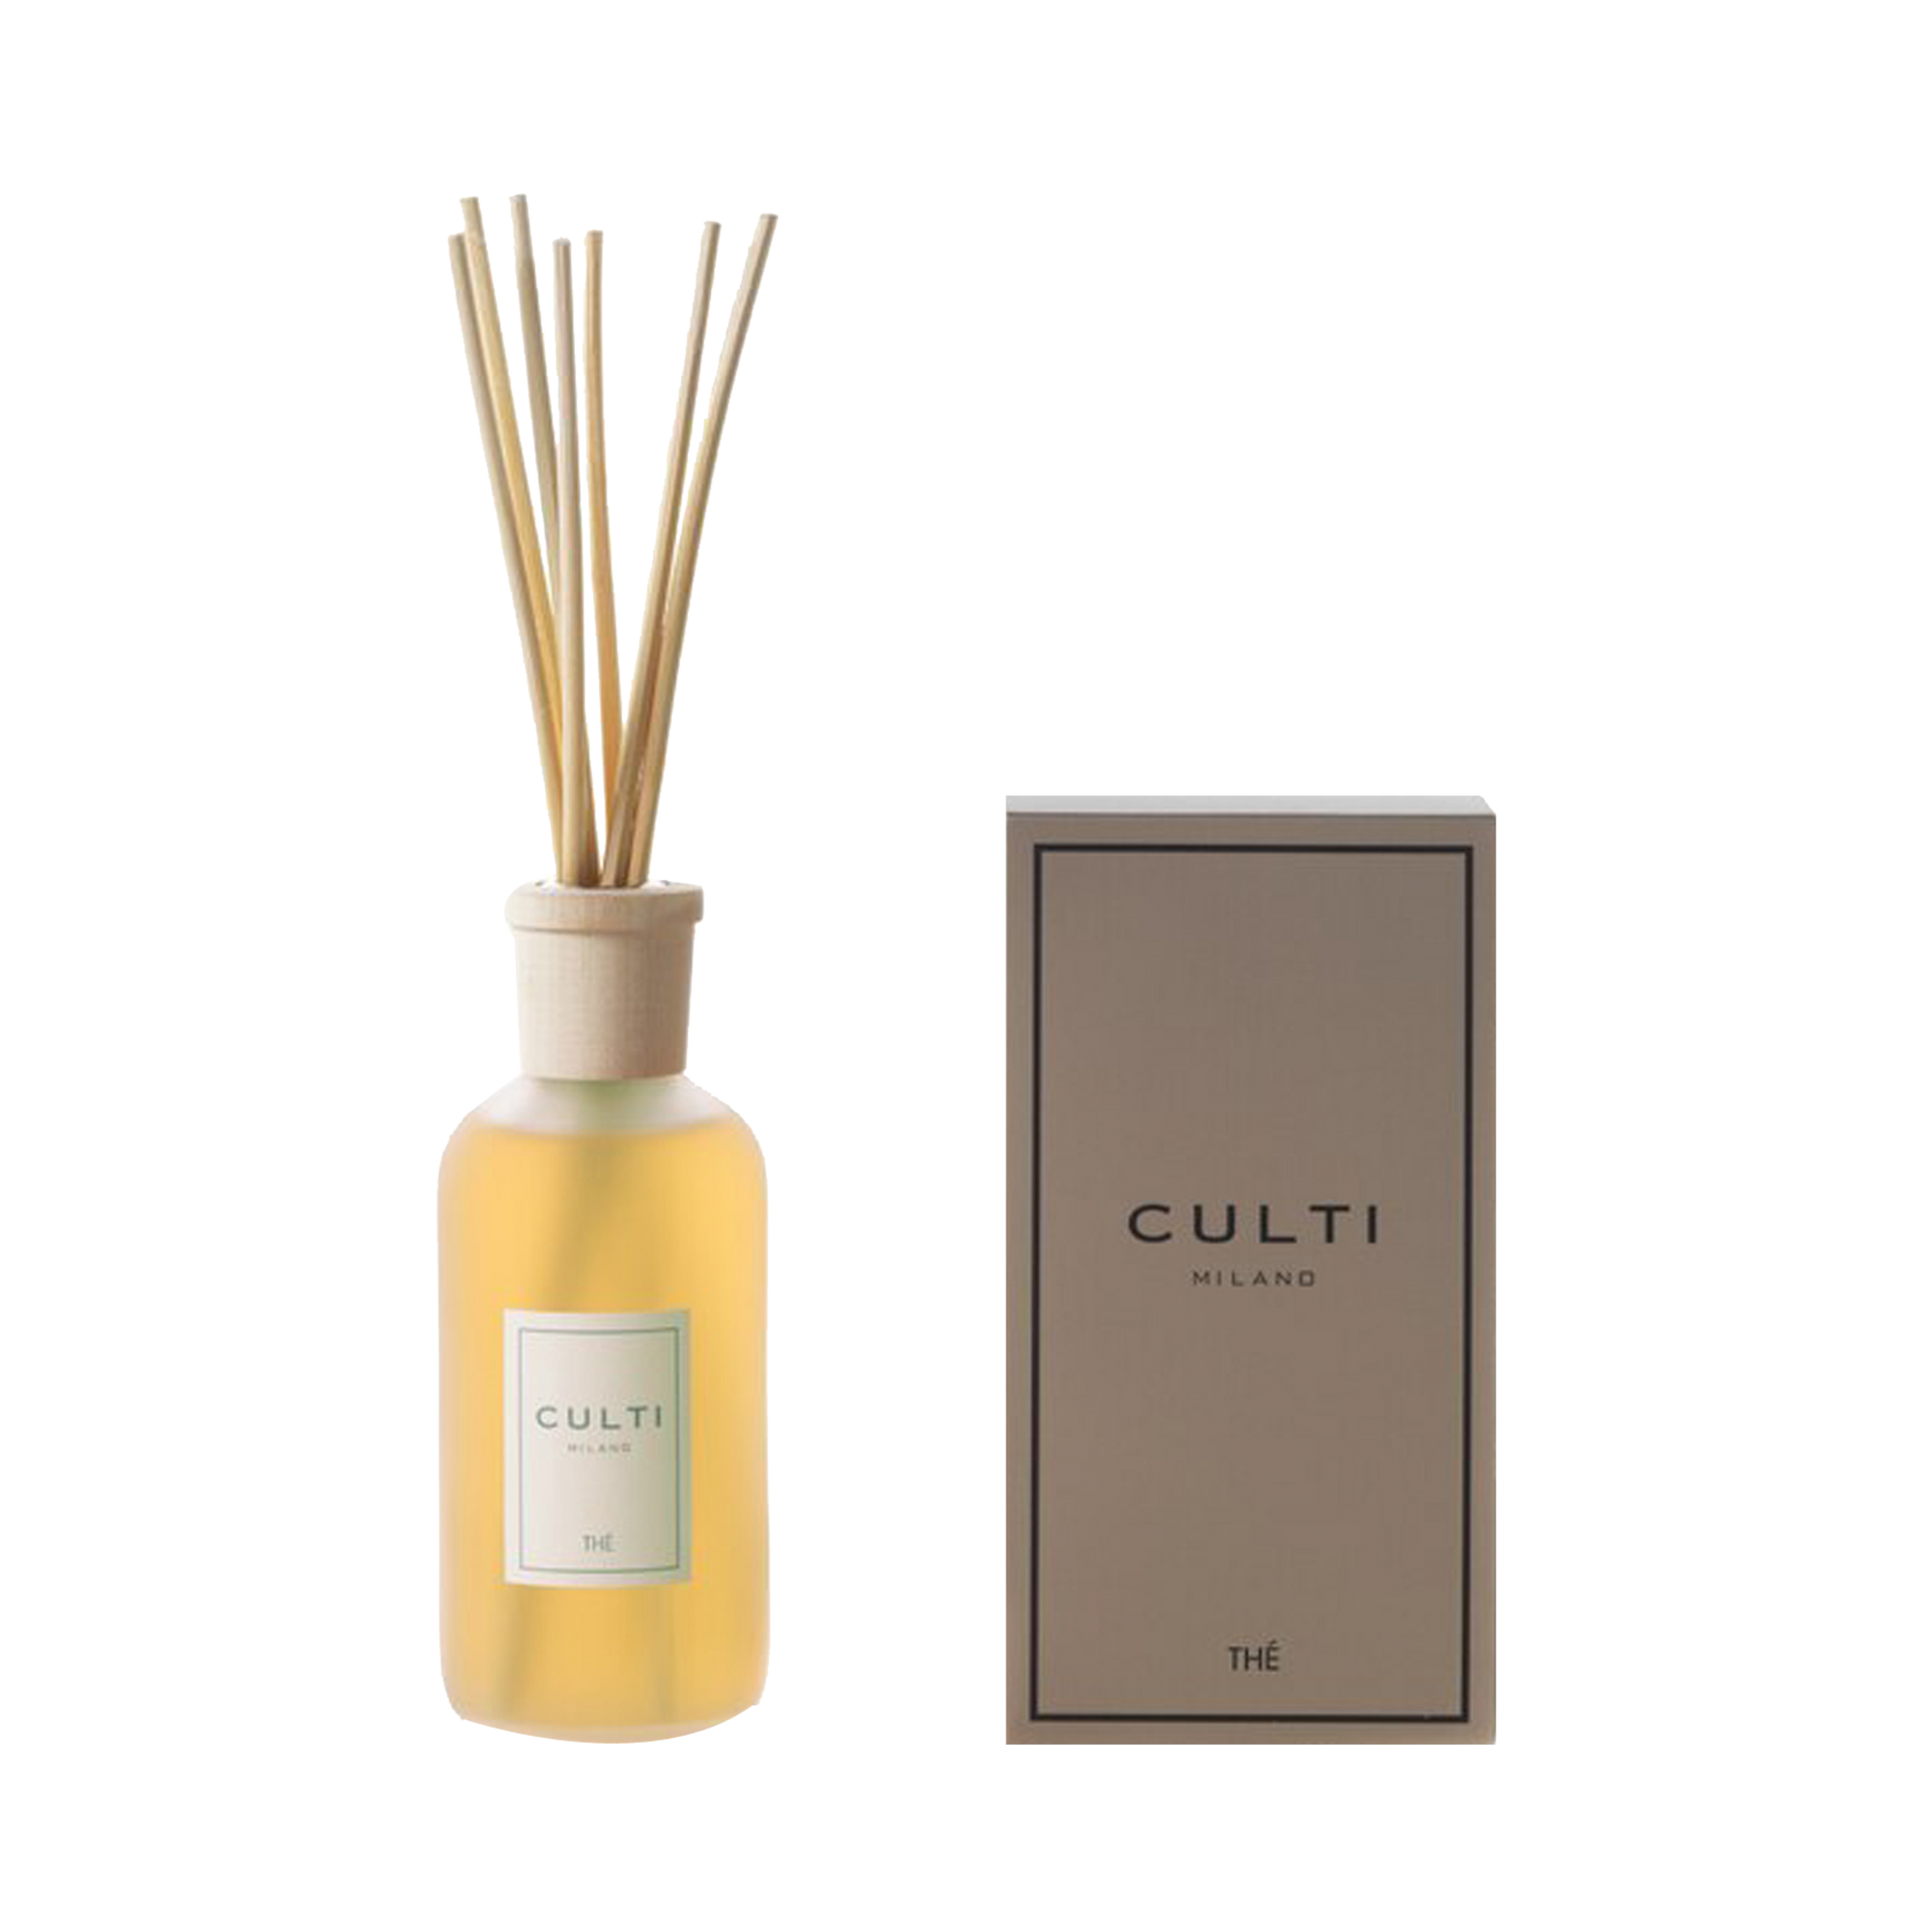 The aesthetic character of the STILE line evokes purity and elegance with its frosted glass bottles, ivory-coloured labels and caps in natural maple wood.